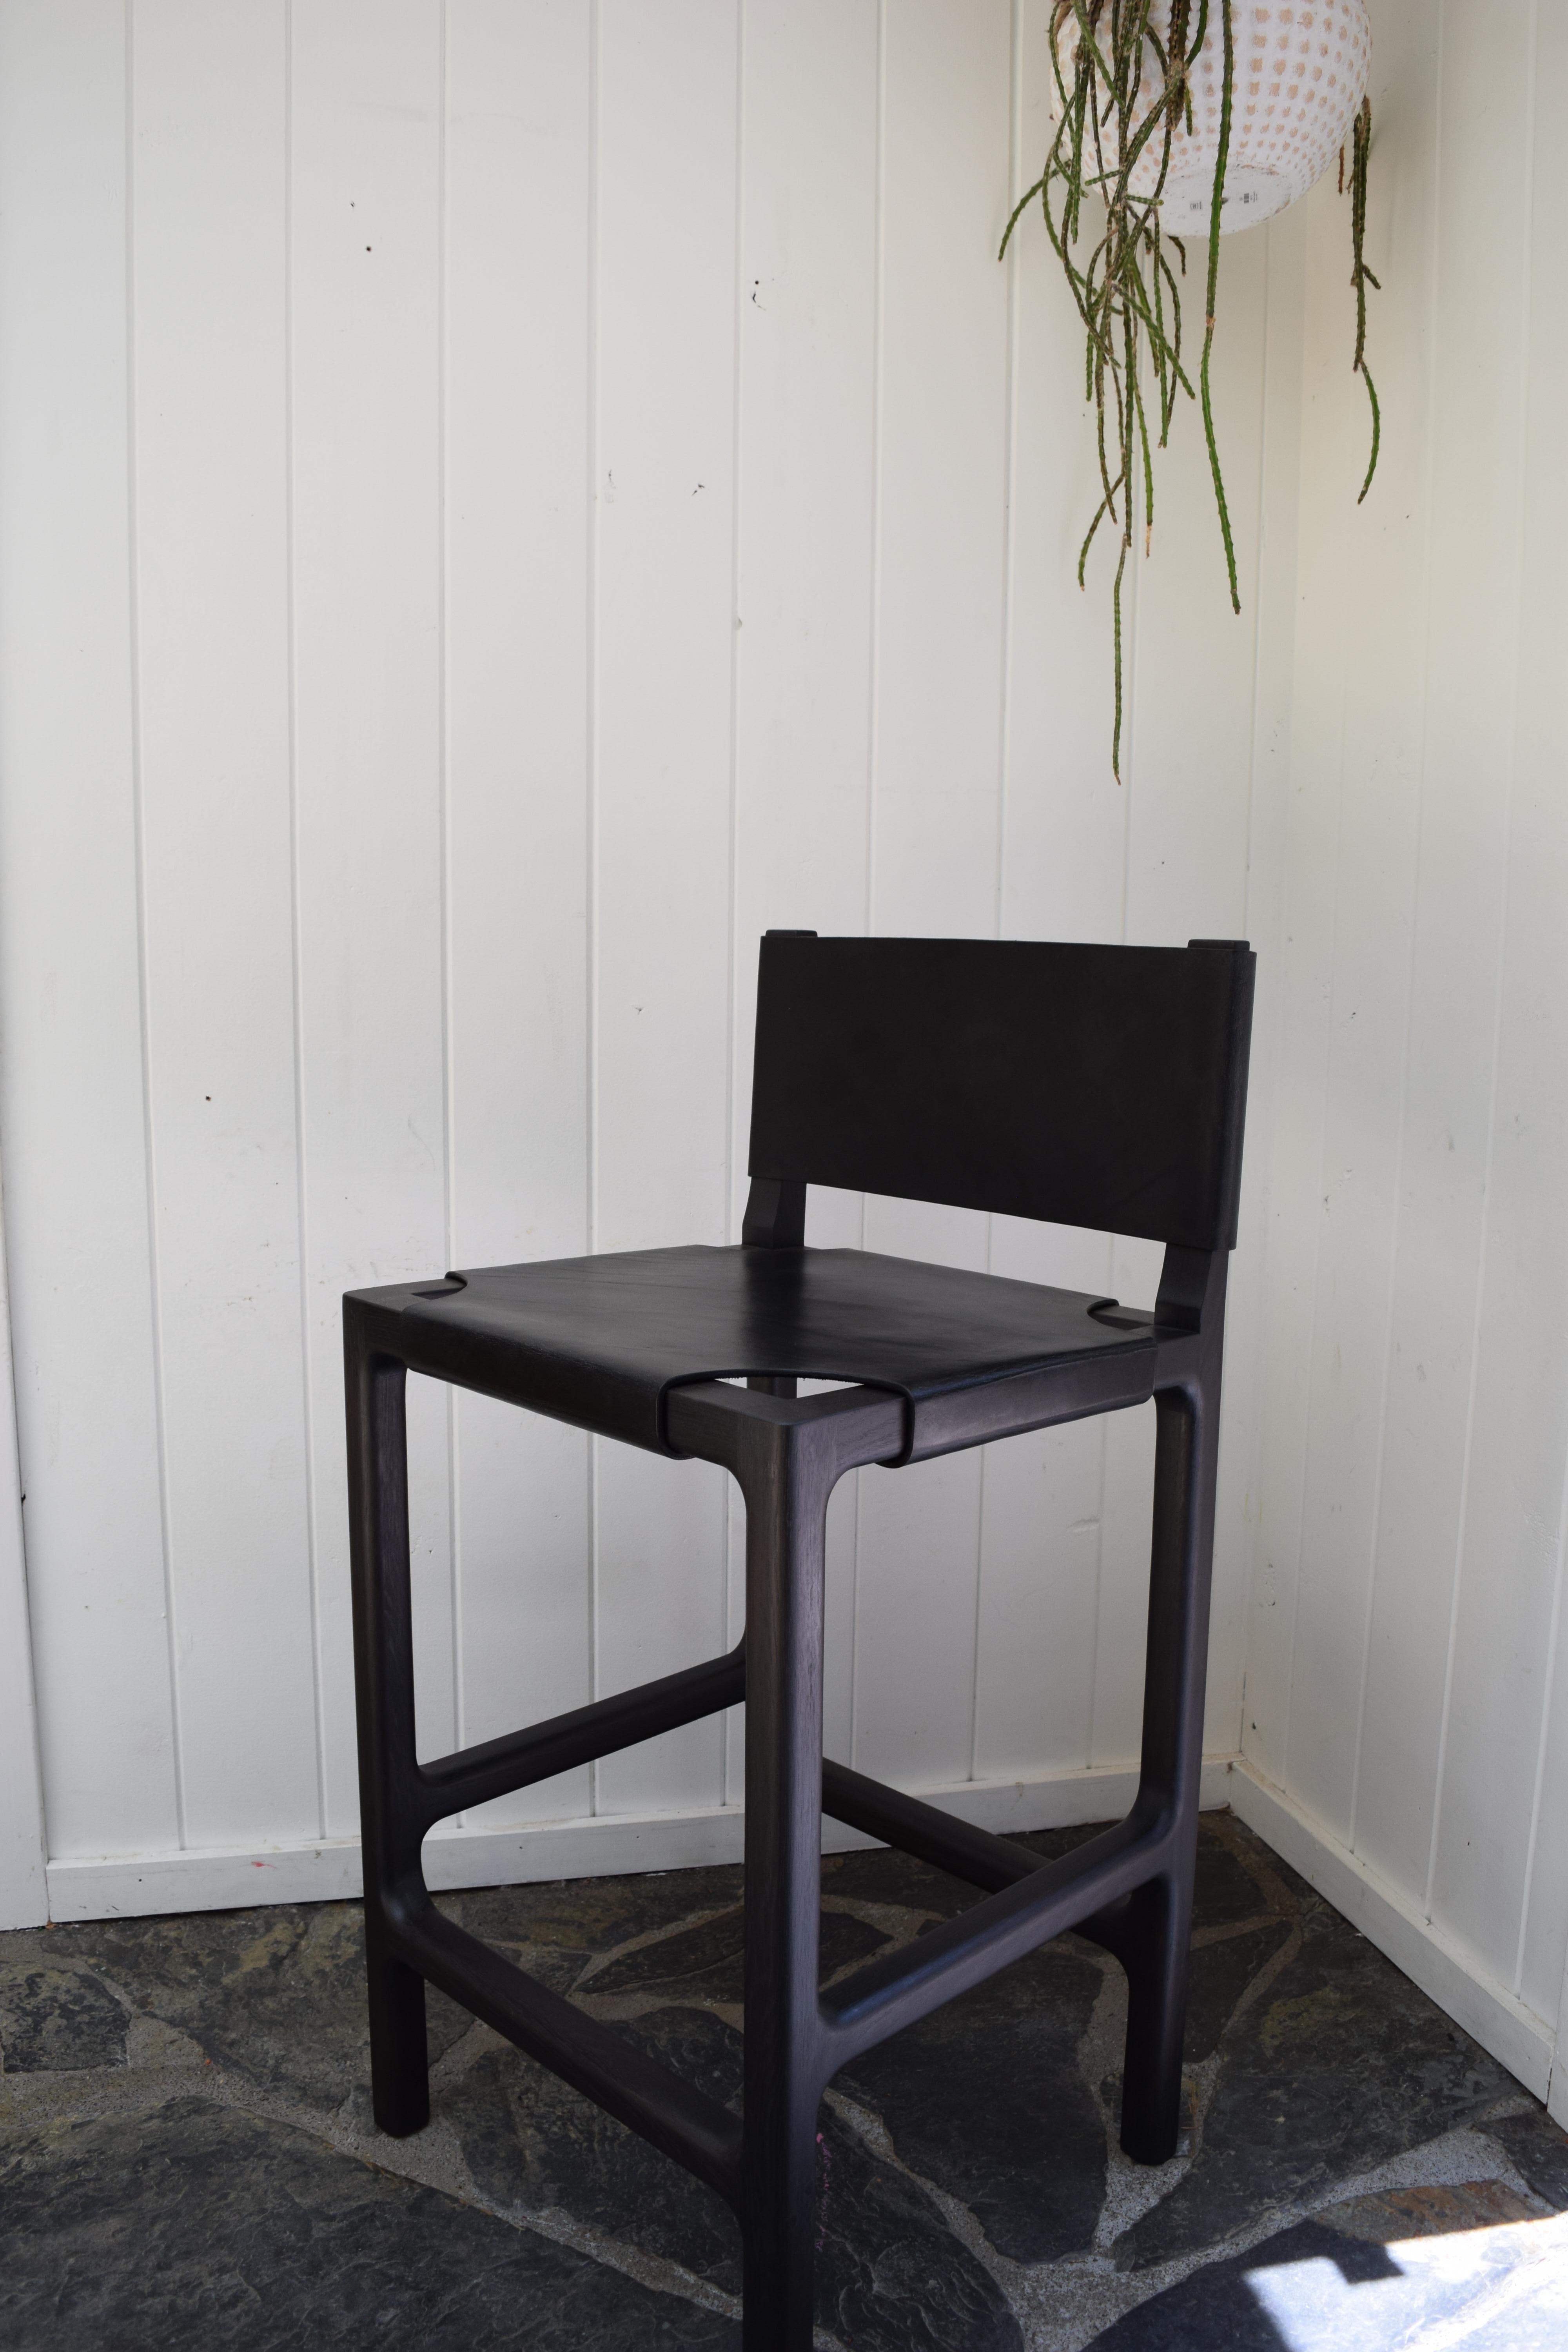 This is an ebonized counter stool with a stretched leather seat and back. The frame is solid oak with a gentle radius at the interior joints and softly rounded edges. The leather is 10 oz vegetable tanned leather that has been stretched across the